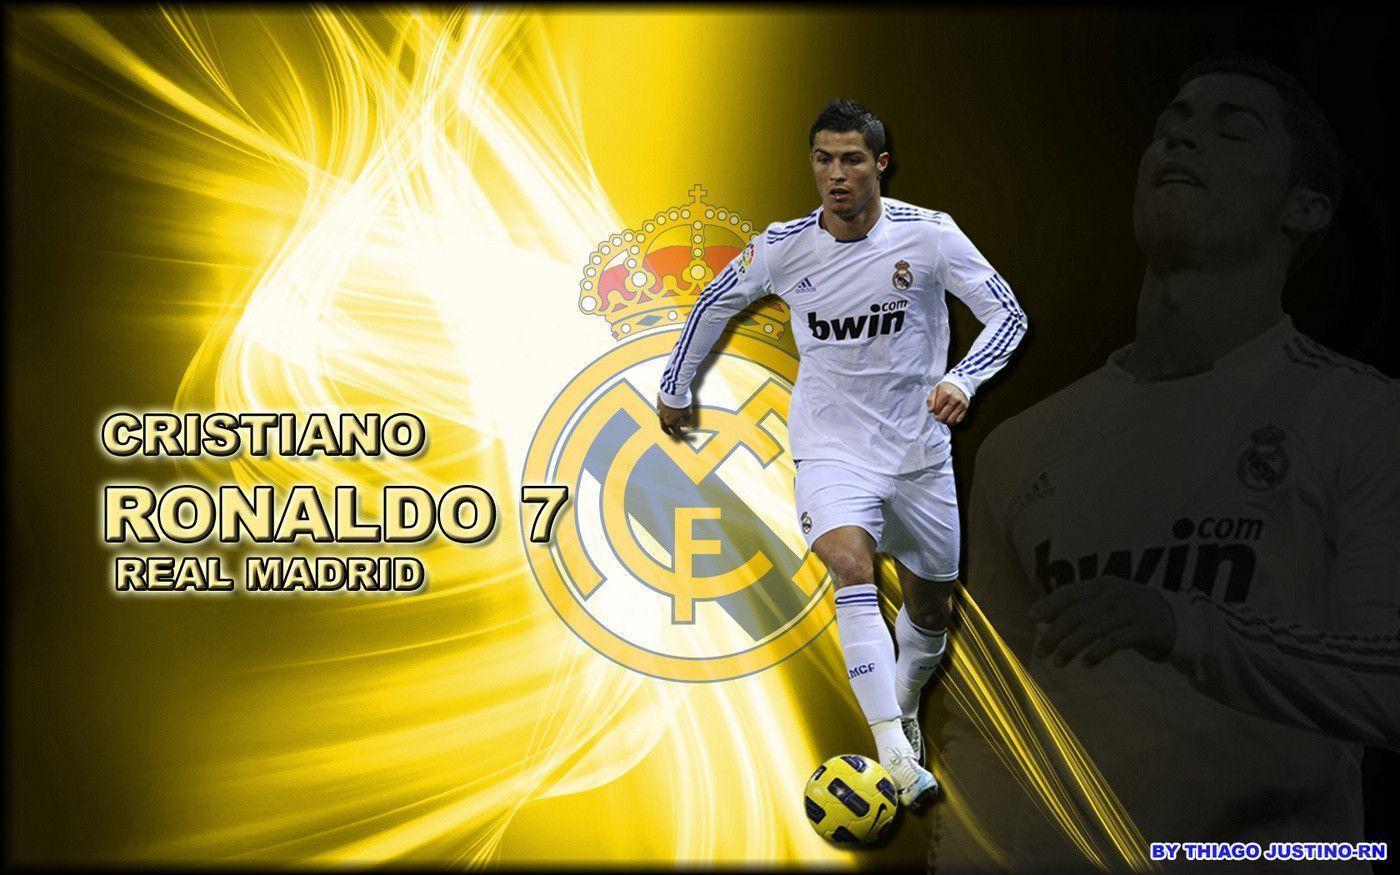 Cristiano Ronaldo Real Madrid Wallpaper and Picture. Football